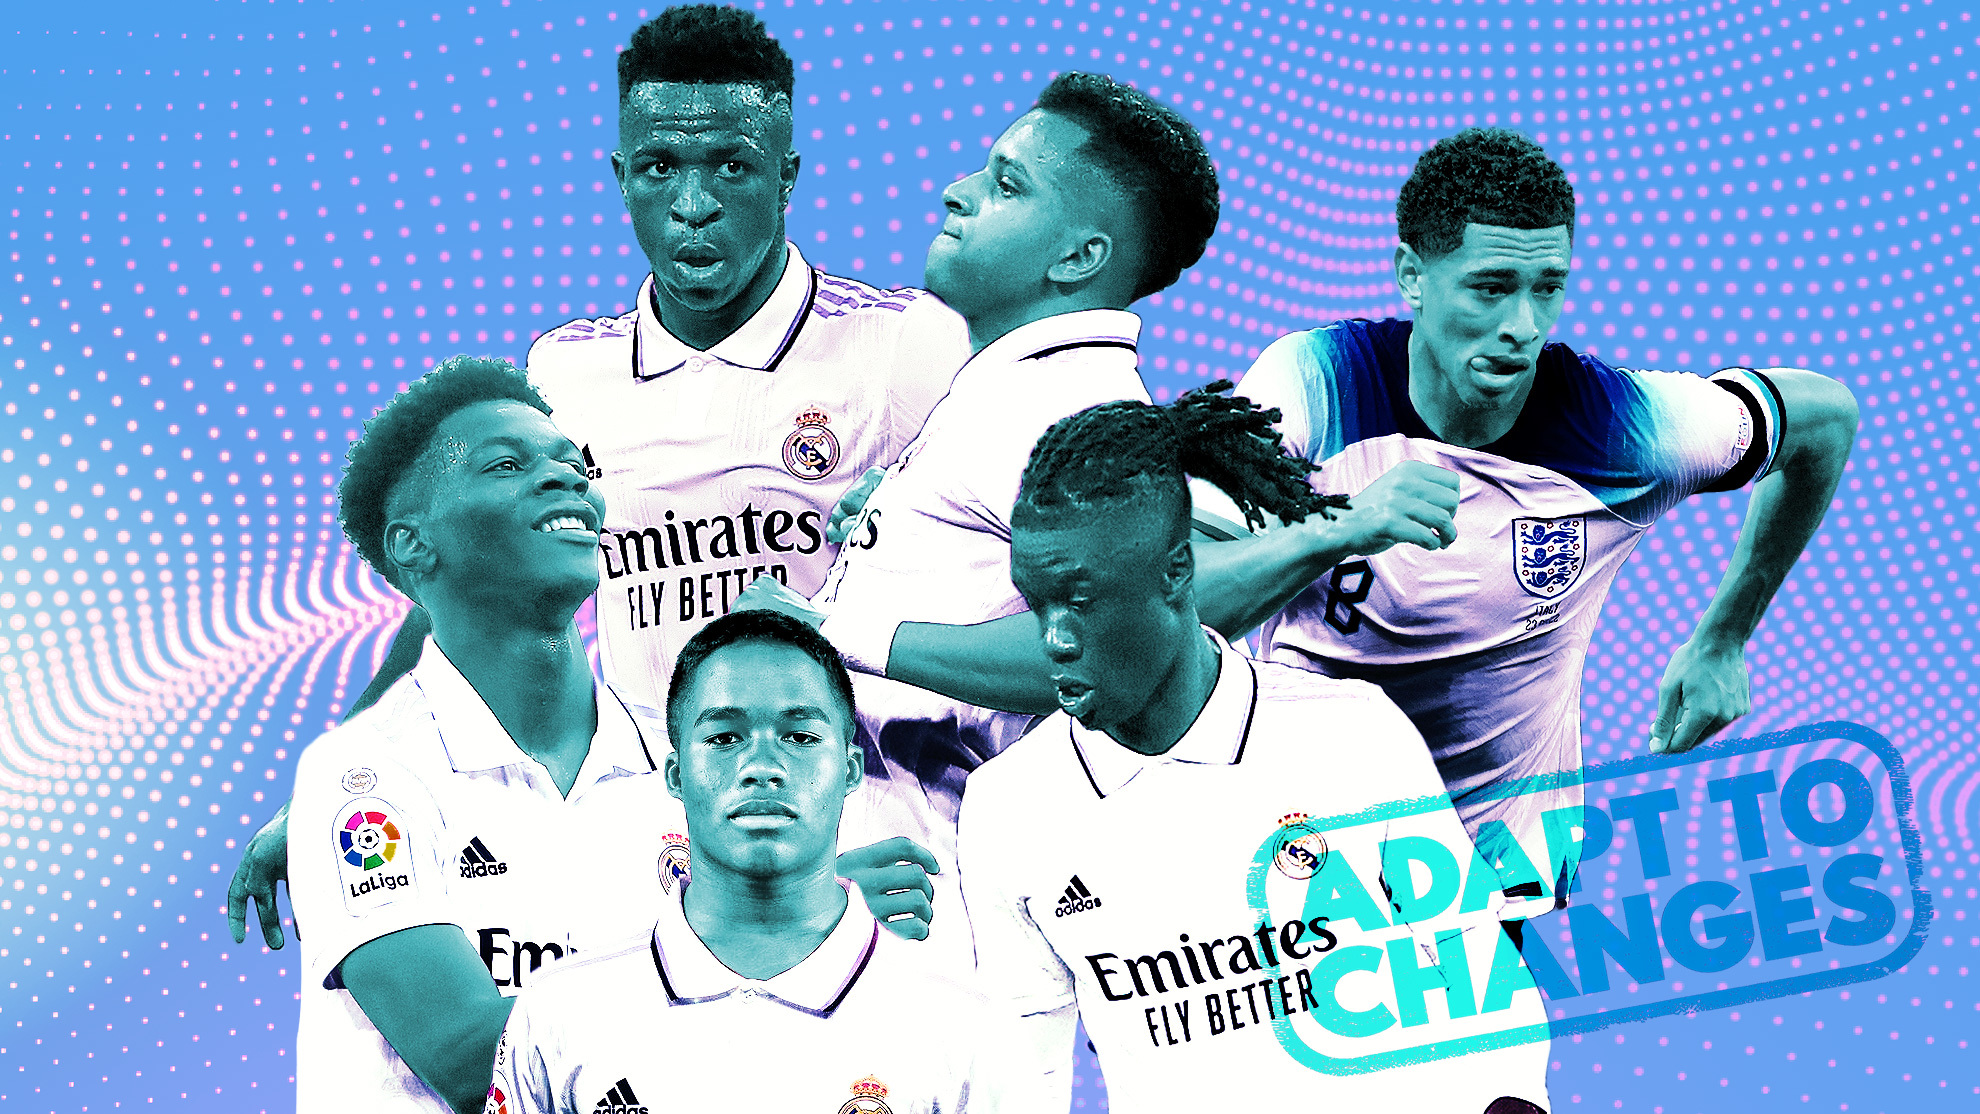 Real Madrid of the future: Evolution, not revolution